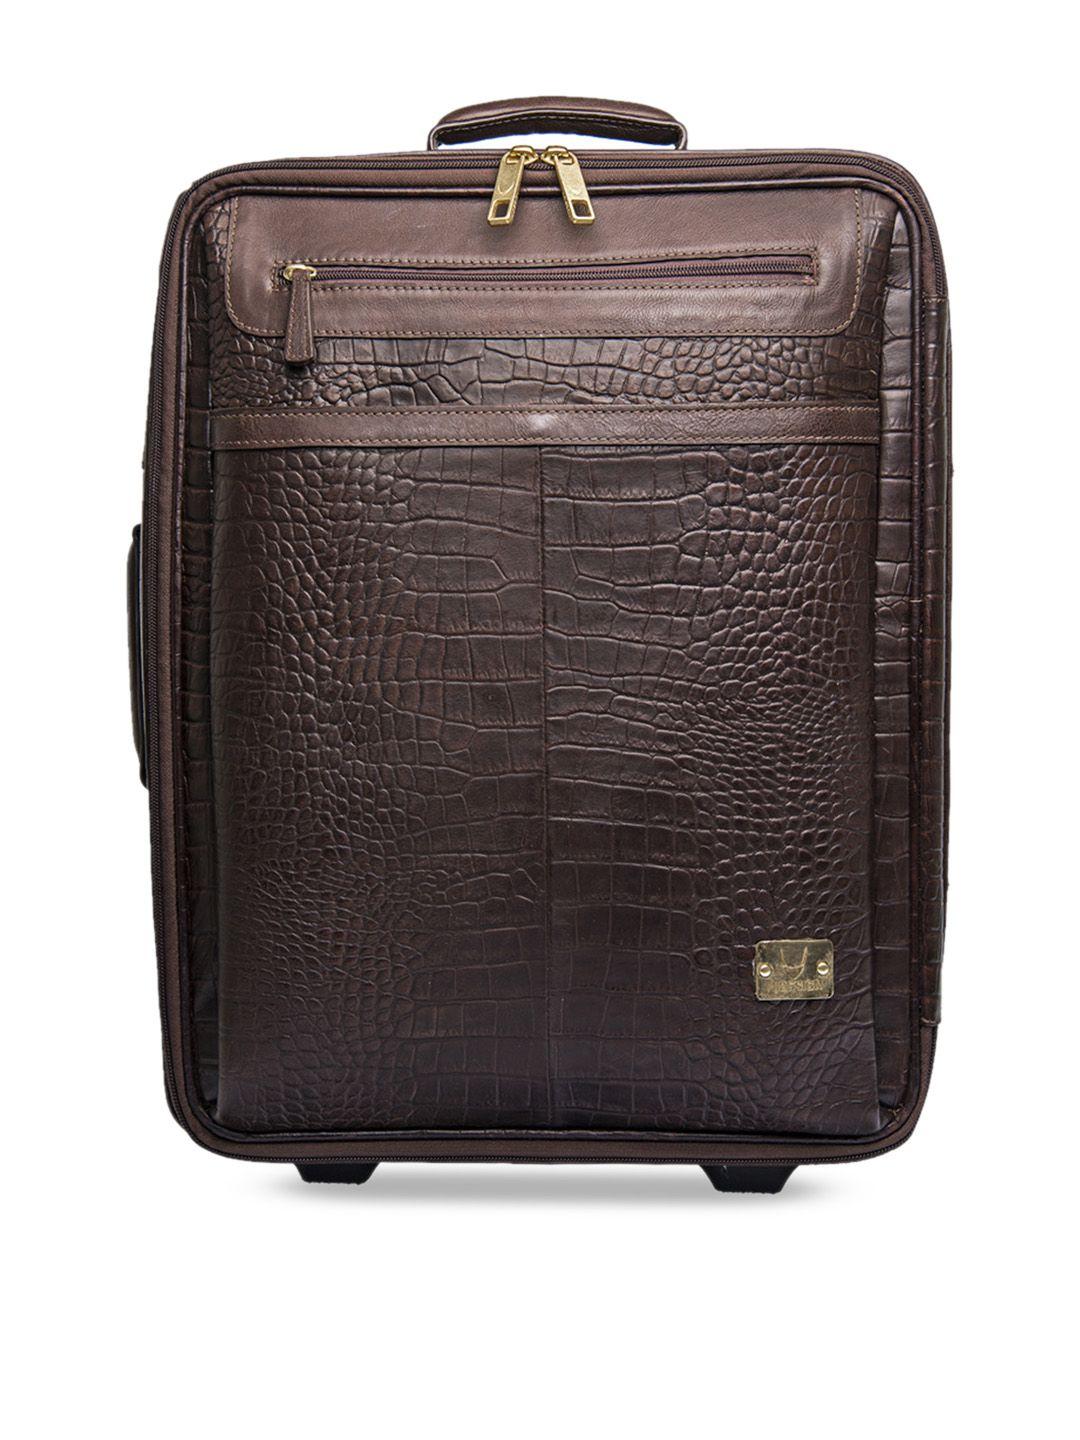 hidesign unisex coffee brown textured leather cabin trolley suitcase